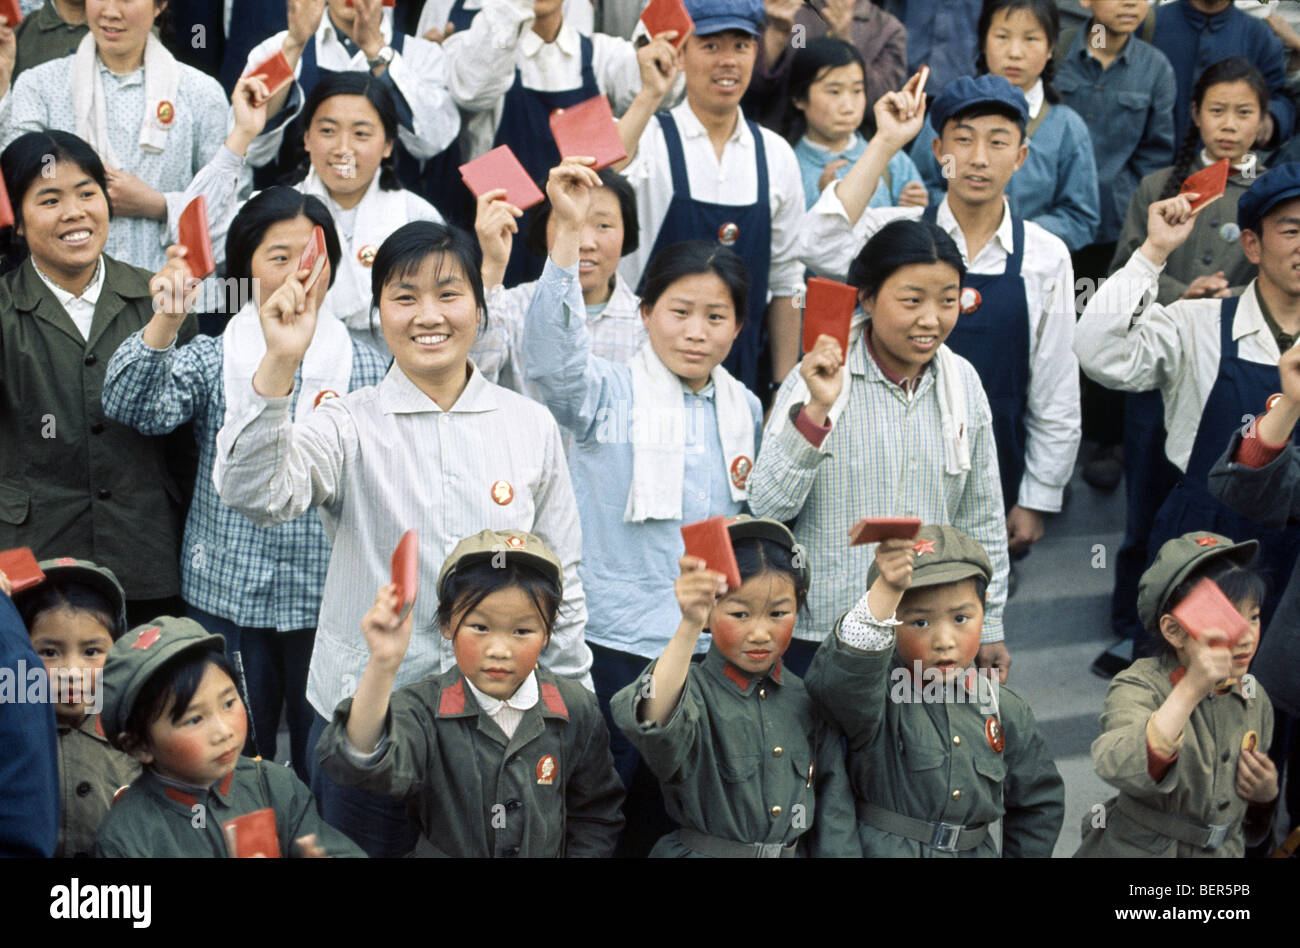 Historical image of China during the Cultural Revolution Stock Photo